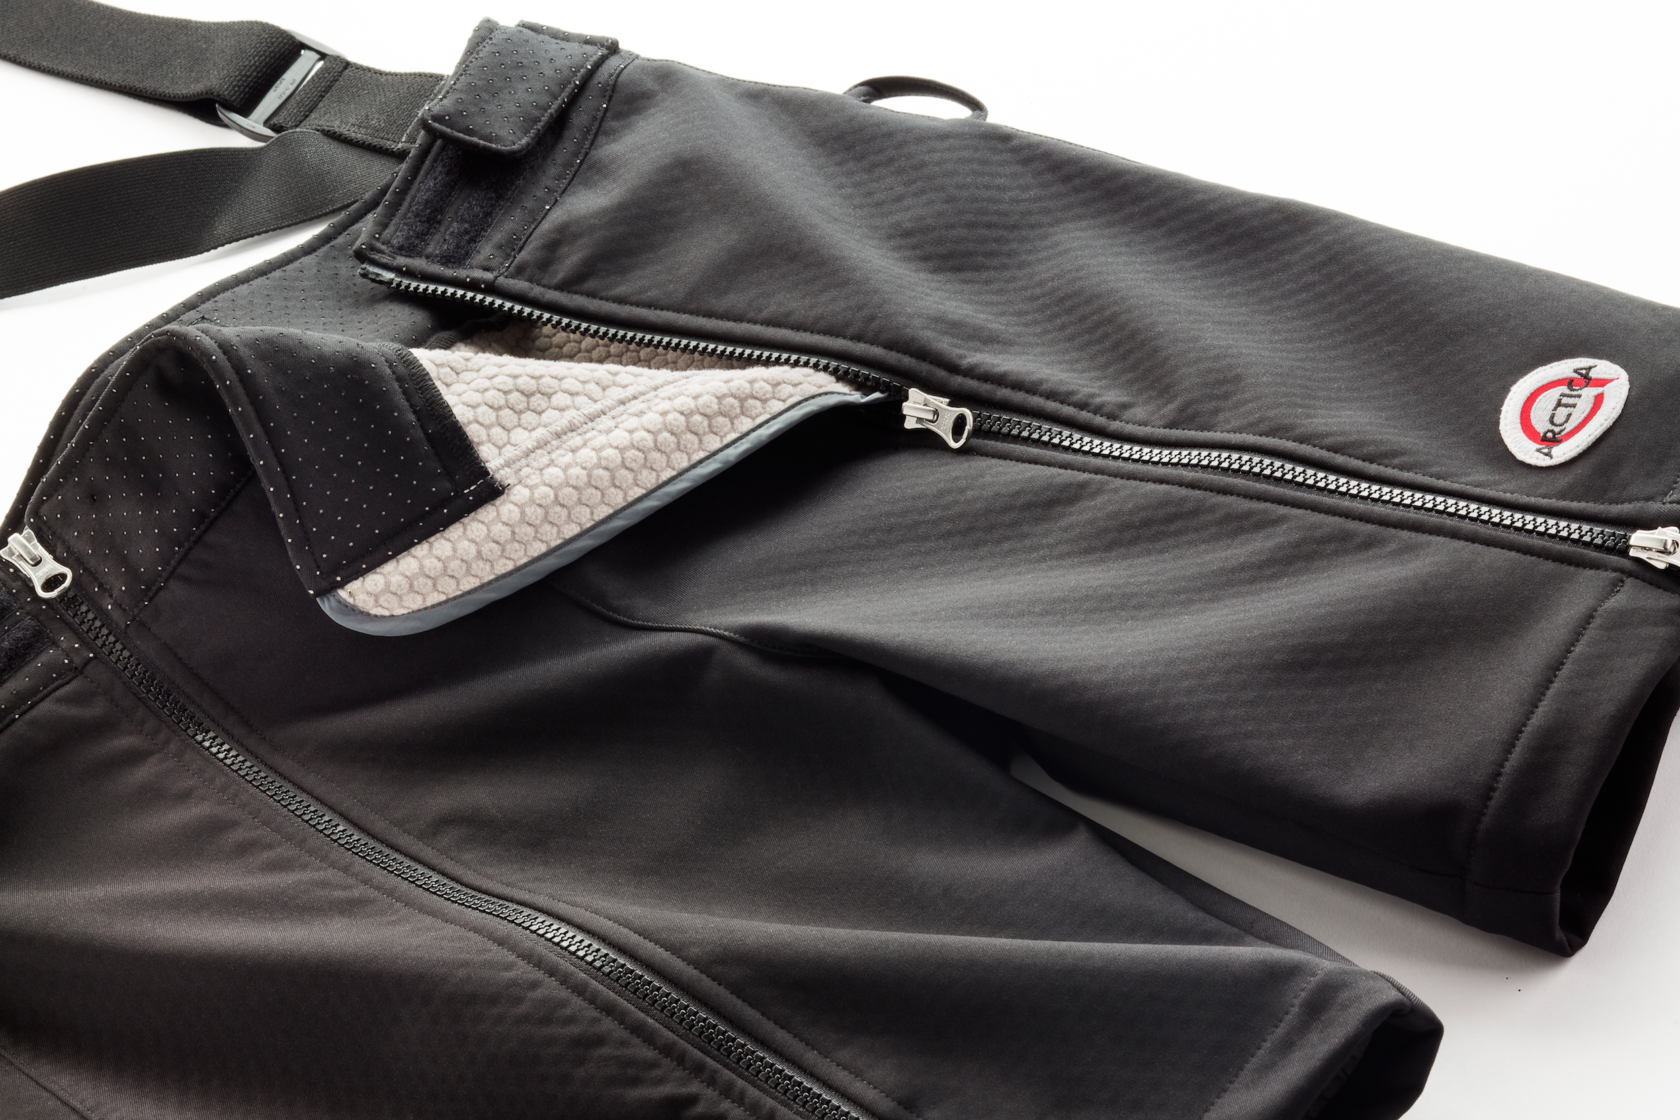 The Arctica Black Kat Training Shorts featuring our proprietary Flexshell softshell fabric